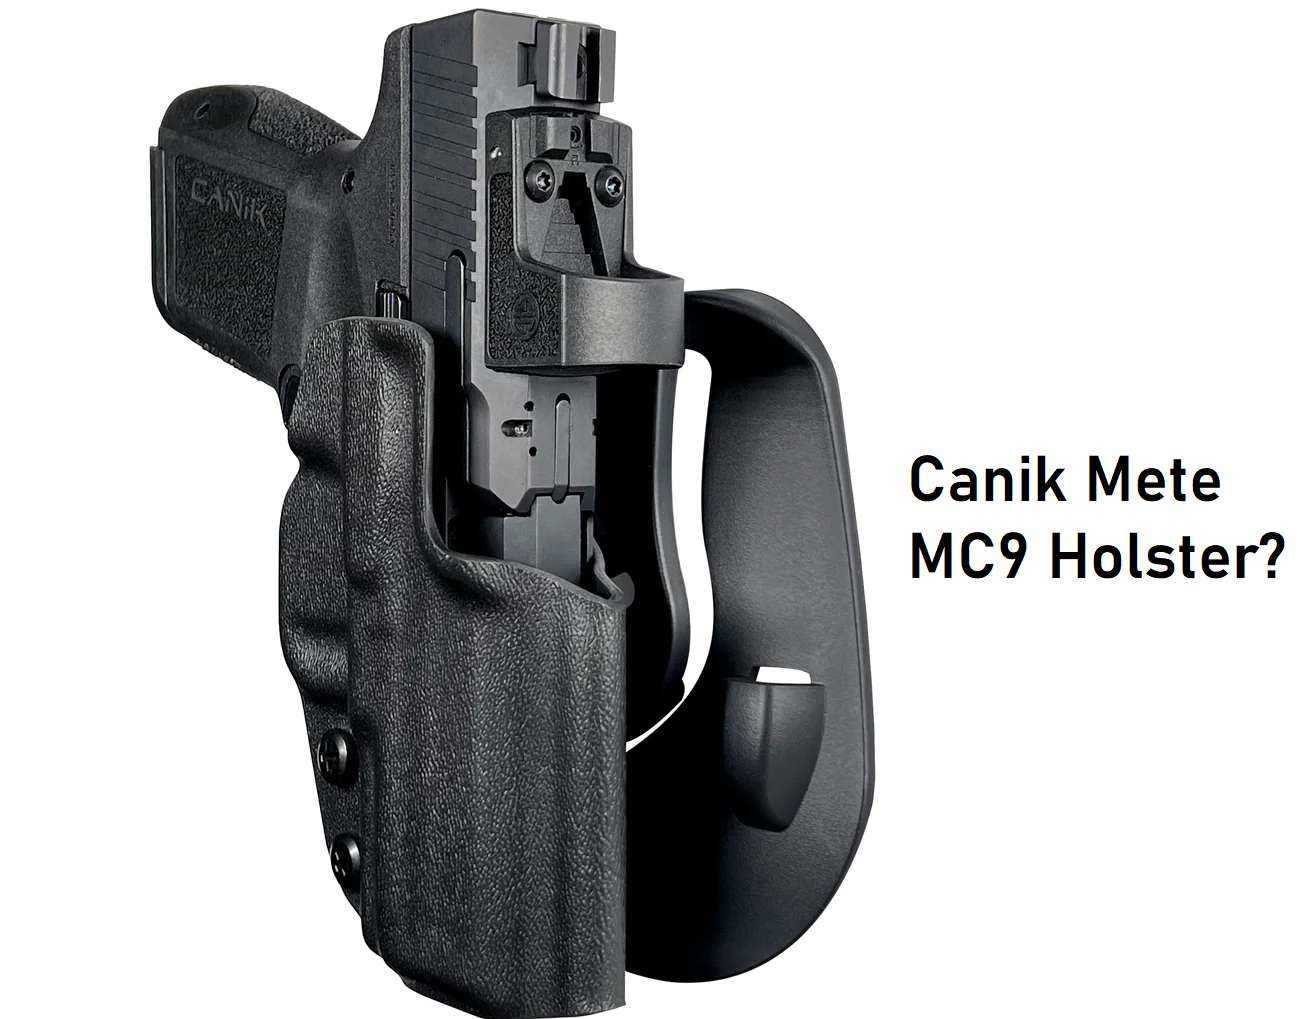 What Are Pros, Cons, And Care Tips For The Canik Mete MC9 Holster?